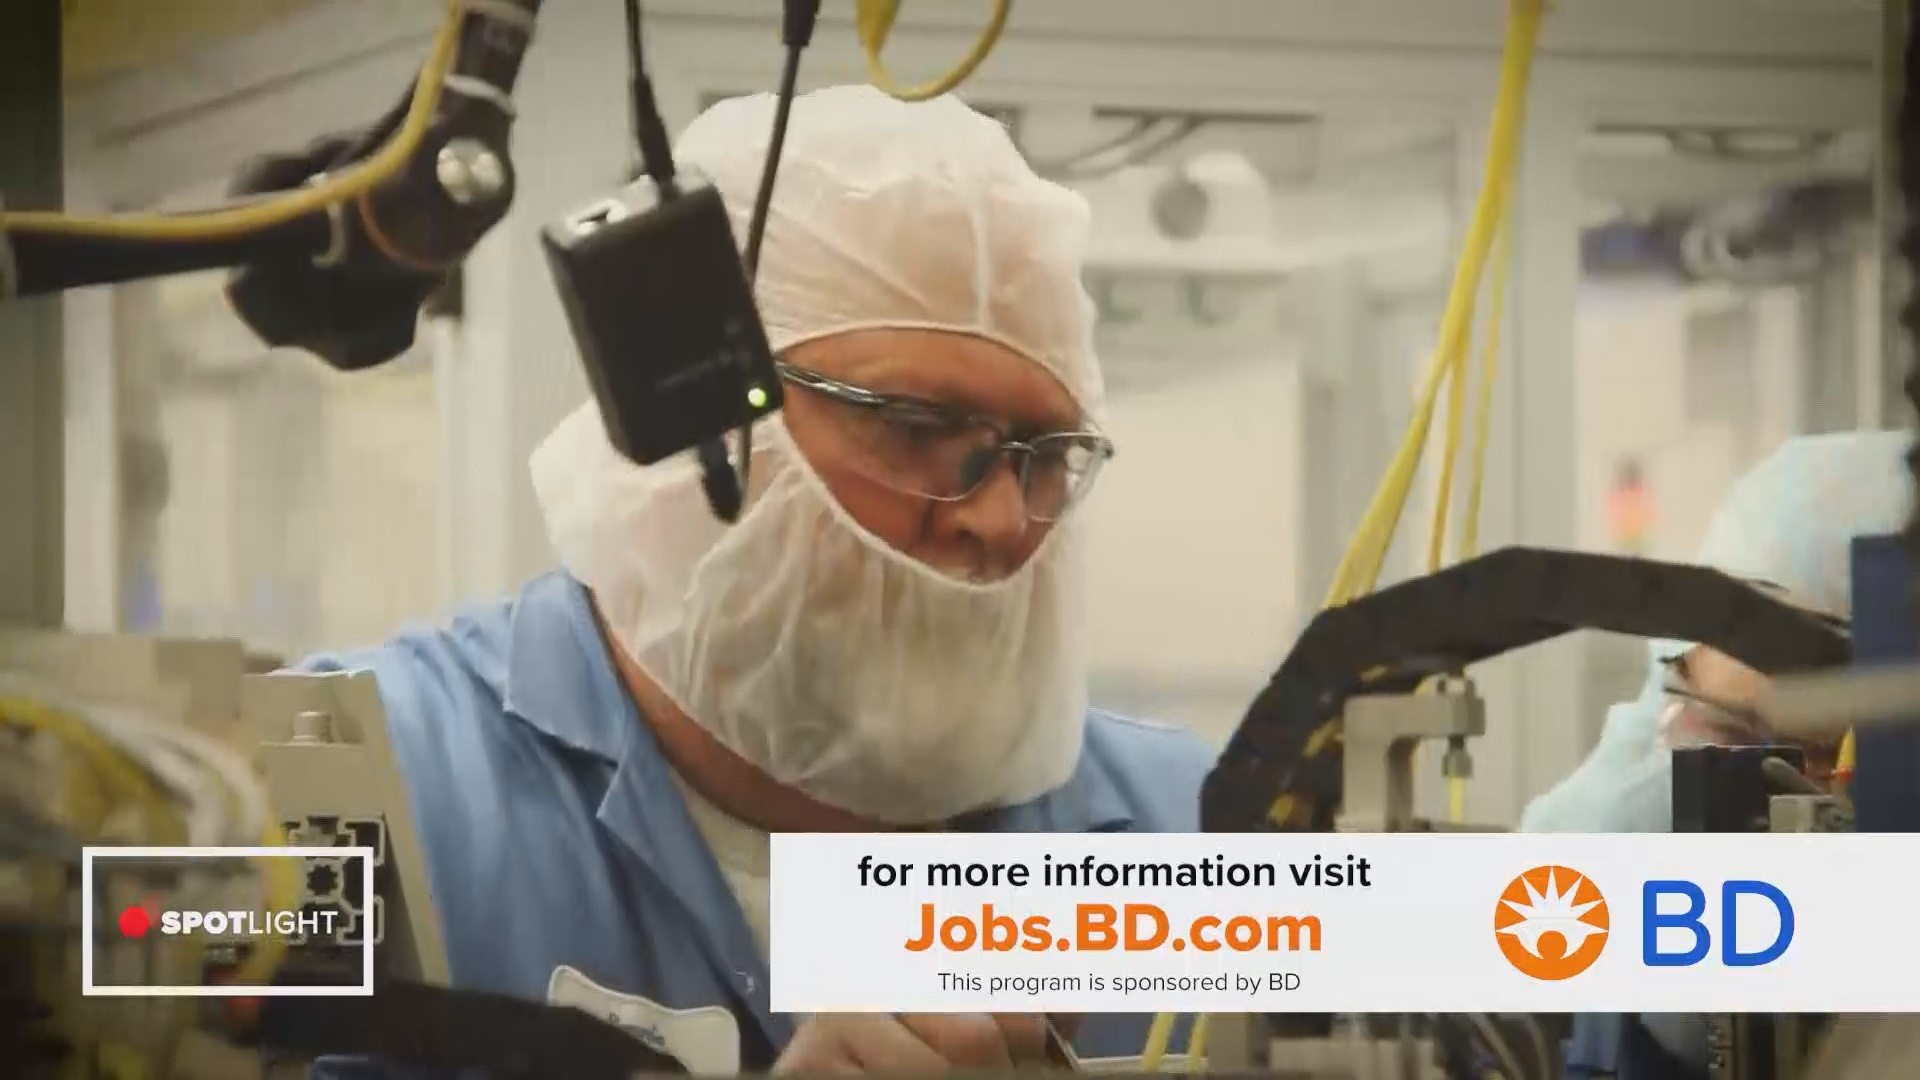 BD is a global medical technology company that is advancing the world of health by improving medical discovery, diagnostics and the delivery of care.